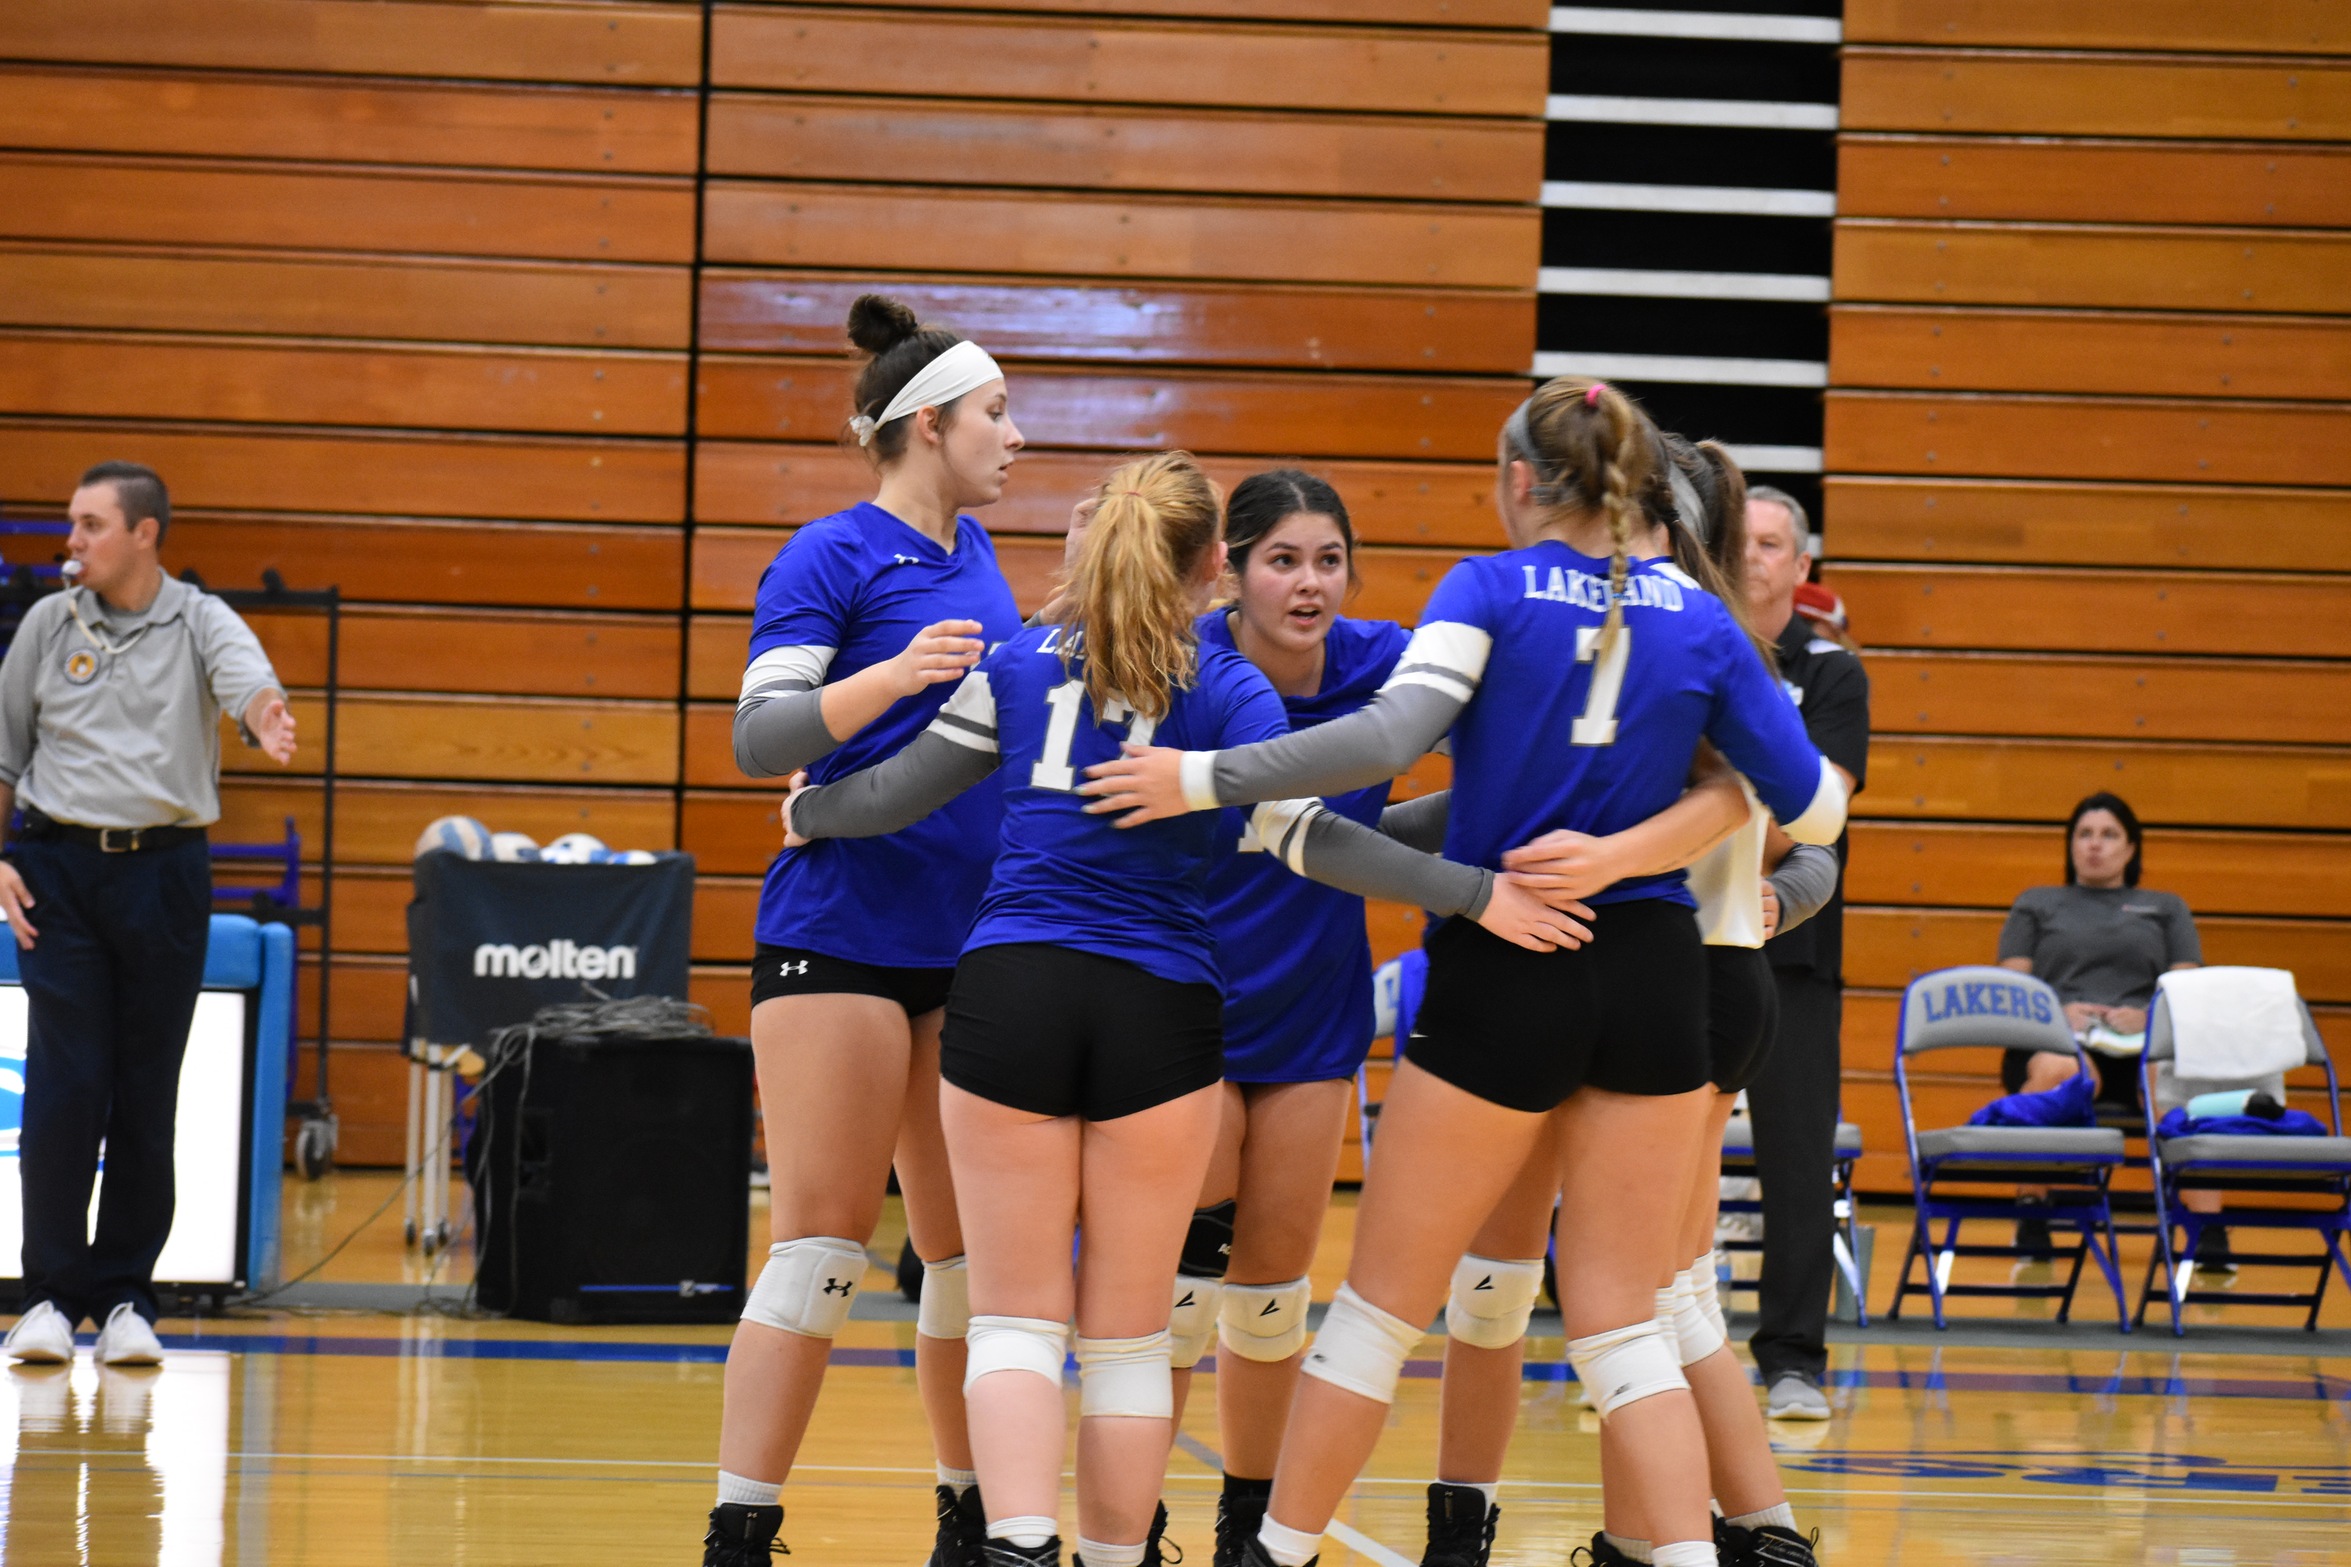 Lakers volleyball falls to Express